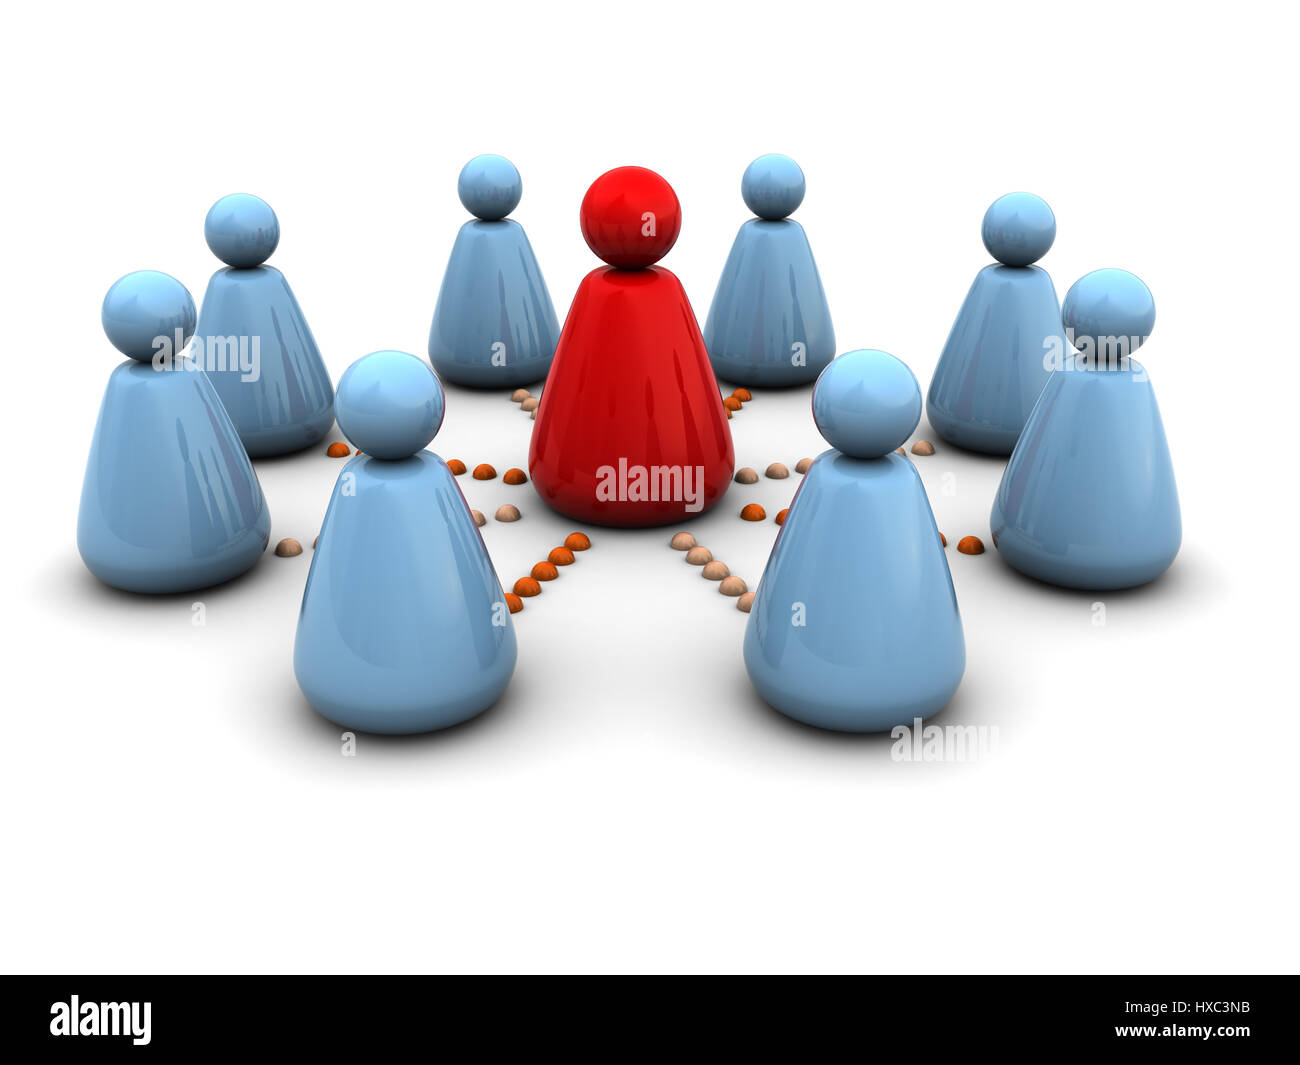 abstract 3d illustration of business team organization Stock Photo